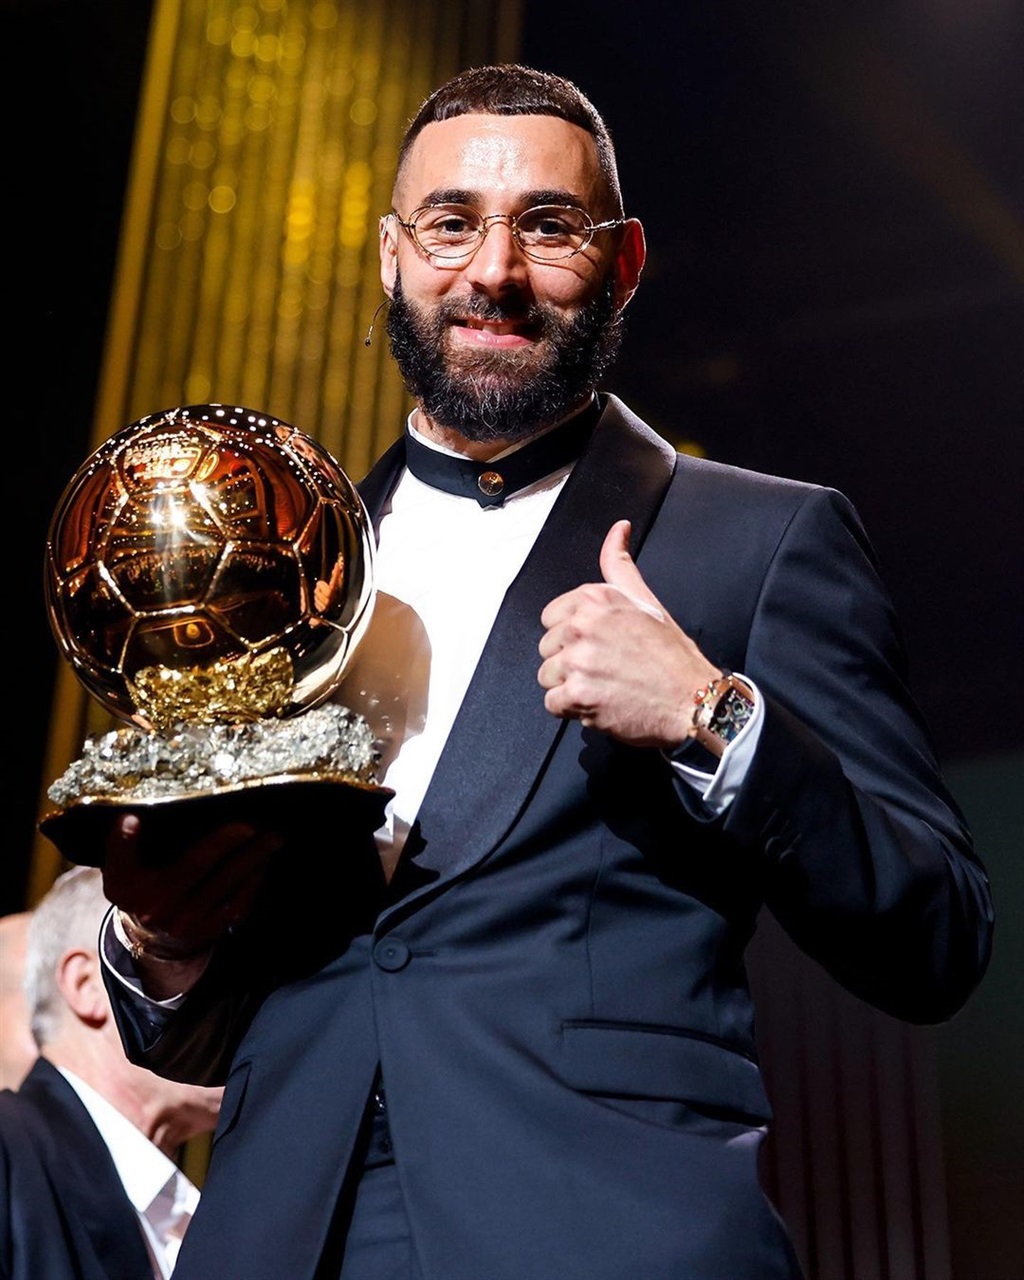 Karim Benzema with his Balon D'or trophy.